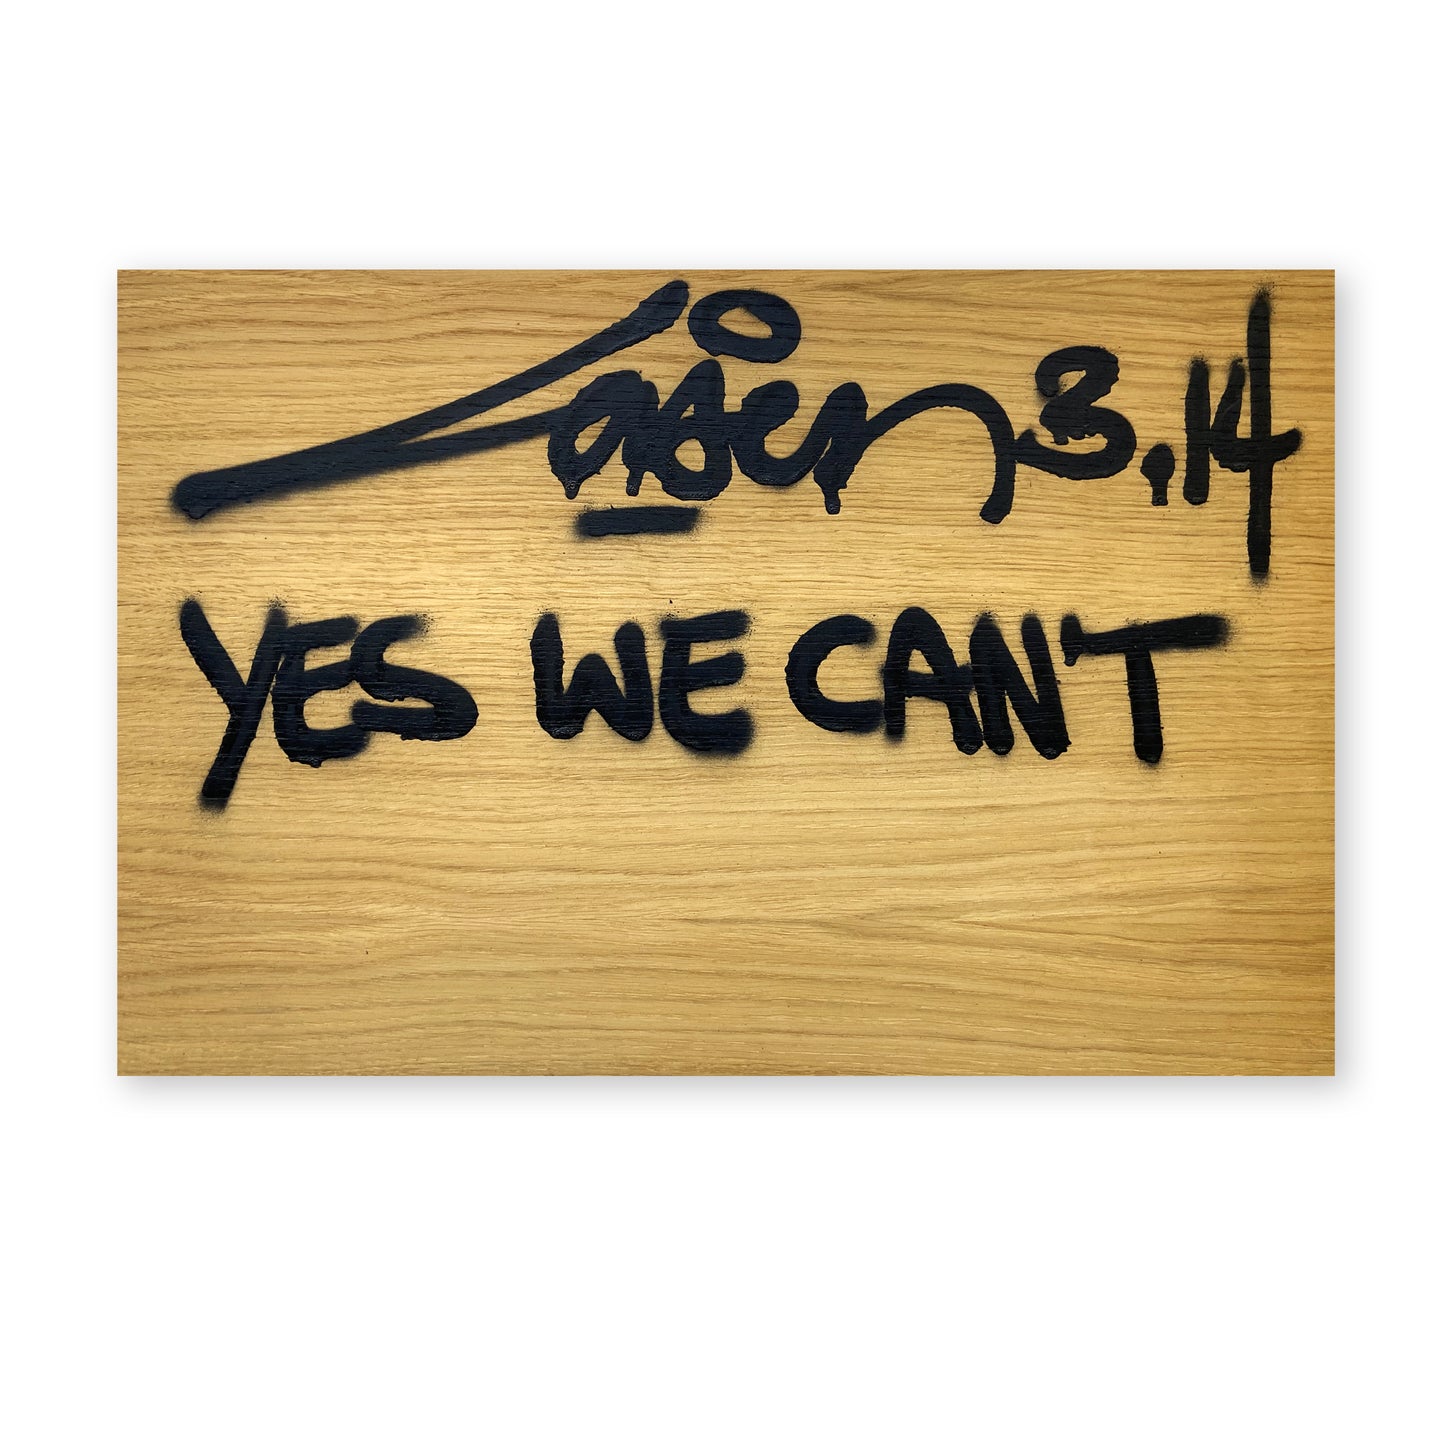 Yes We Can't